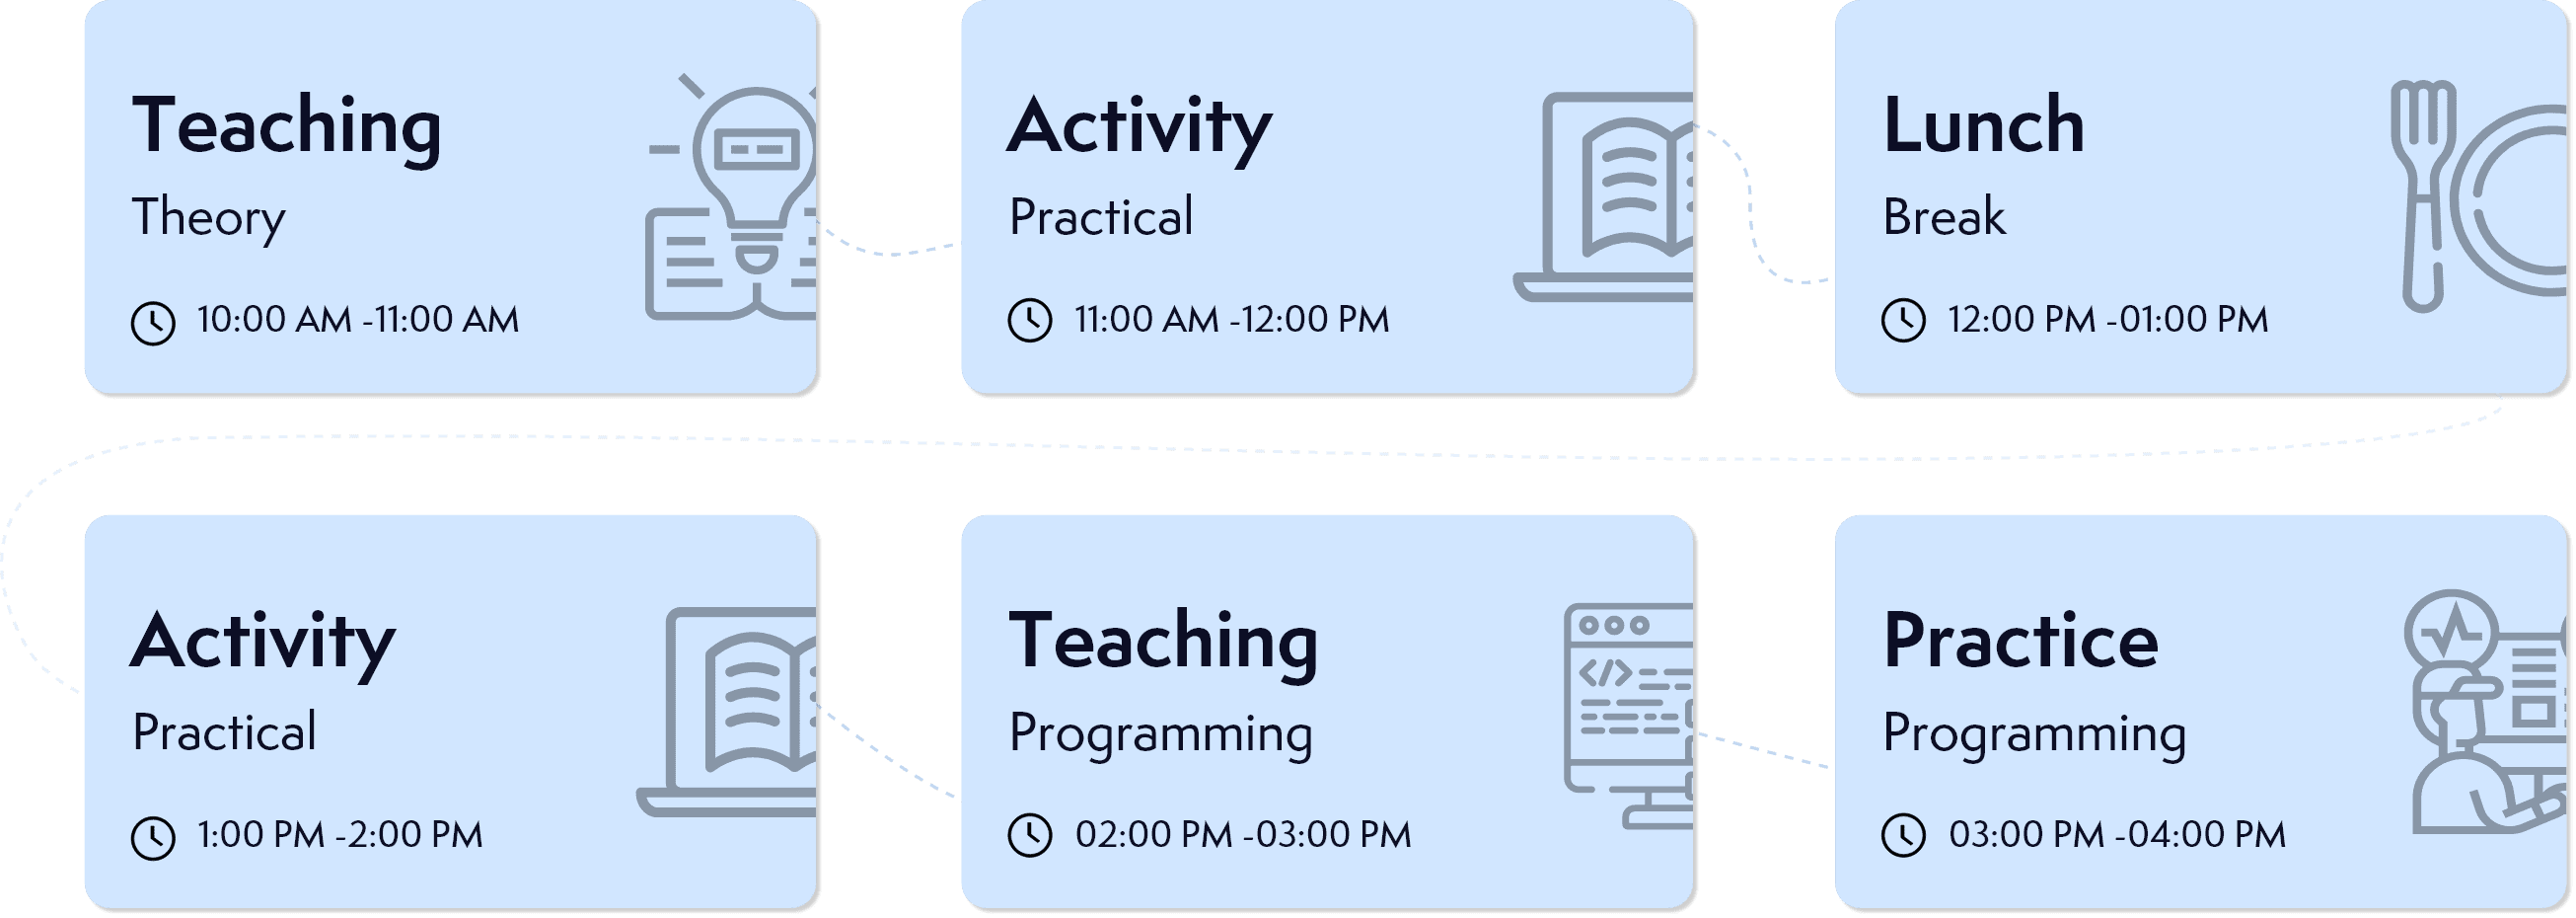 Daily Schedule python for data science and machine learning